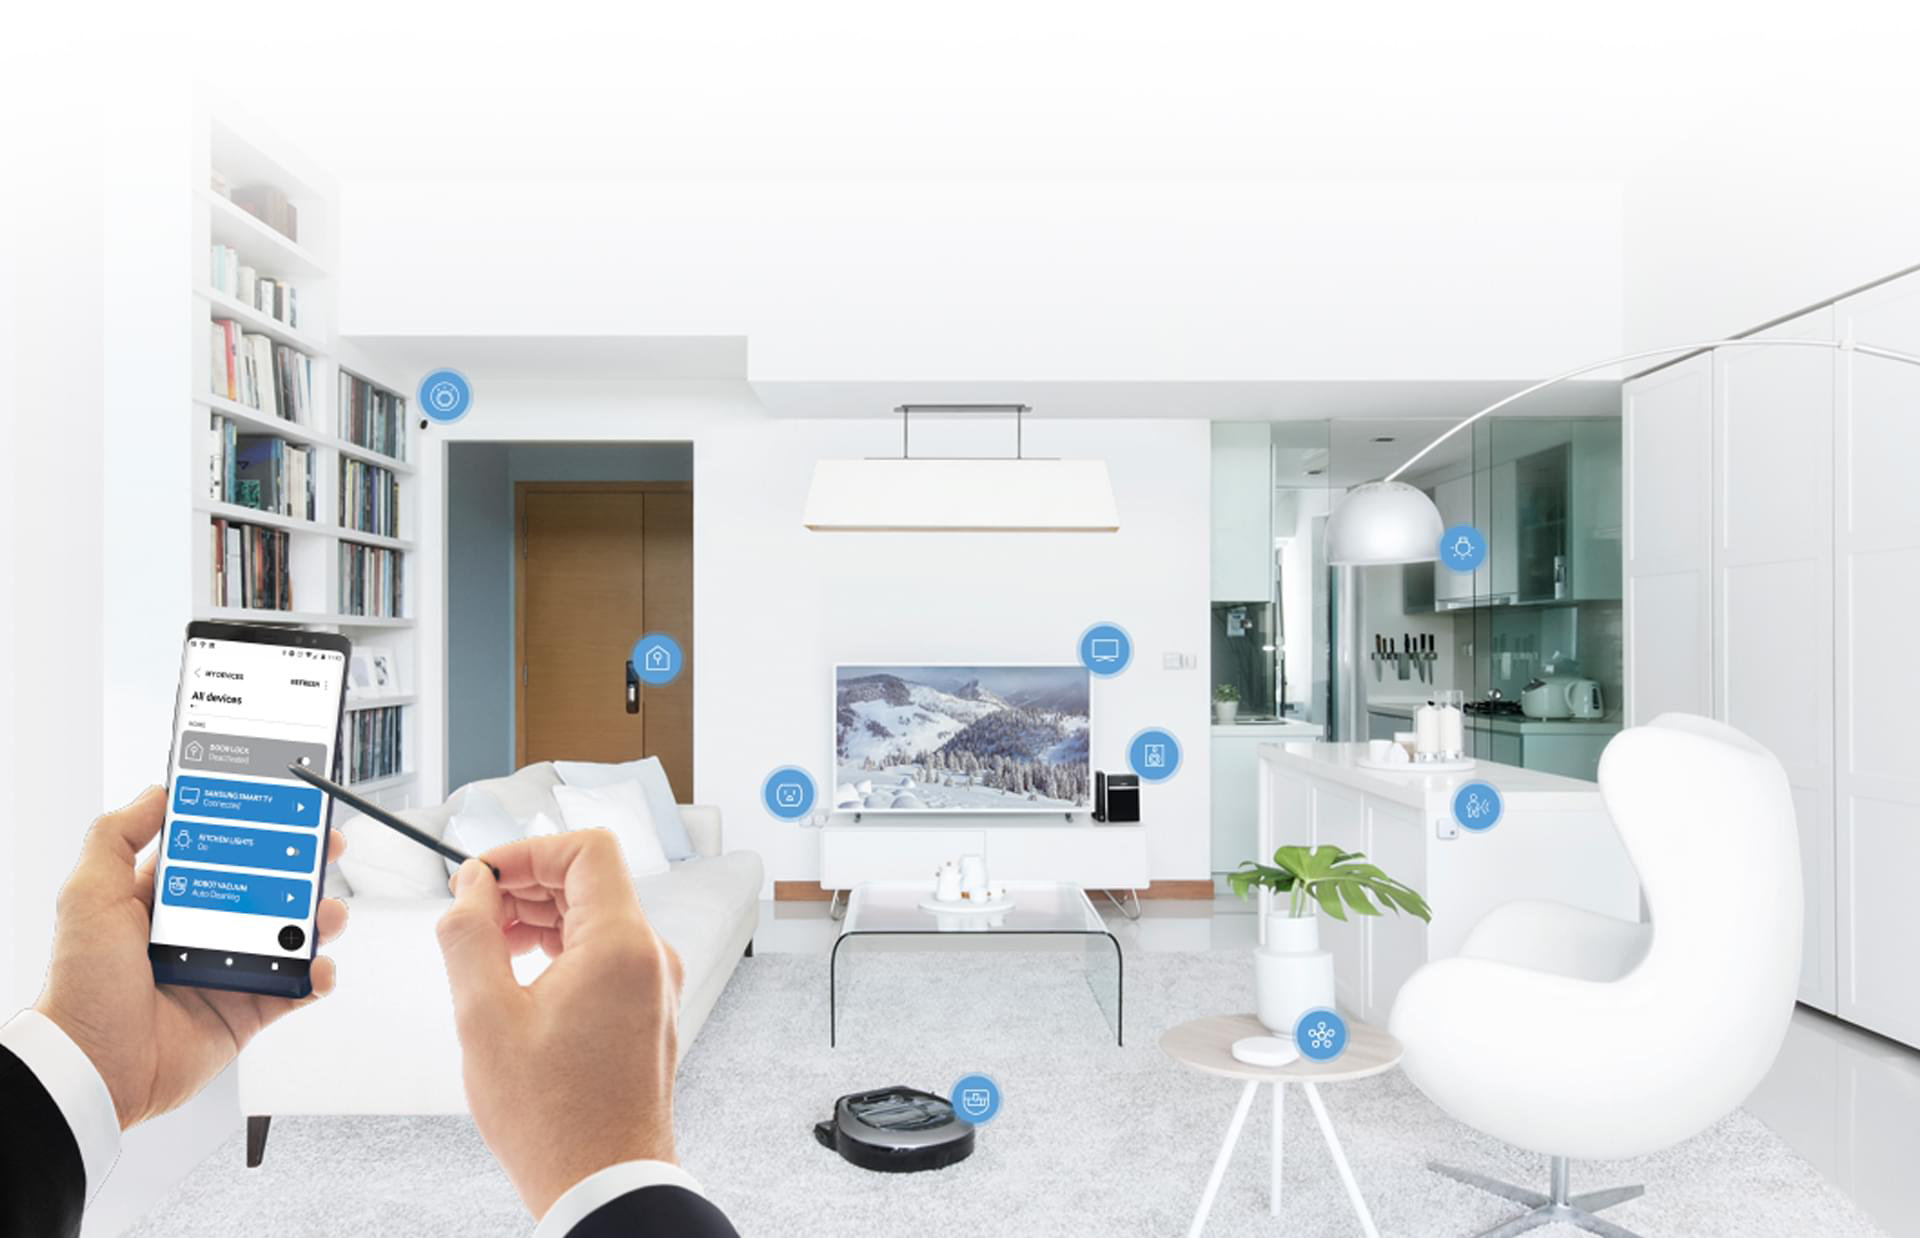 JOIN THE SMART HOME COMMUNITY TODAY